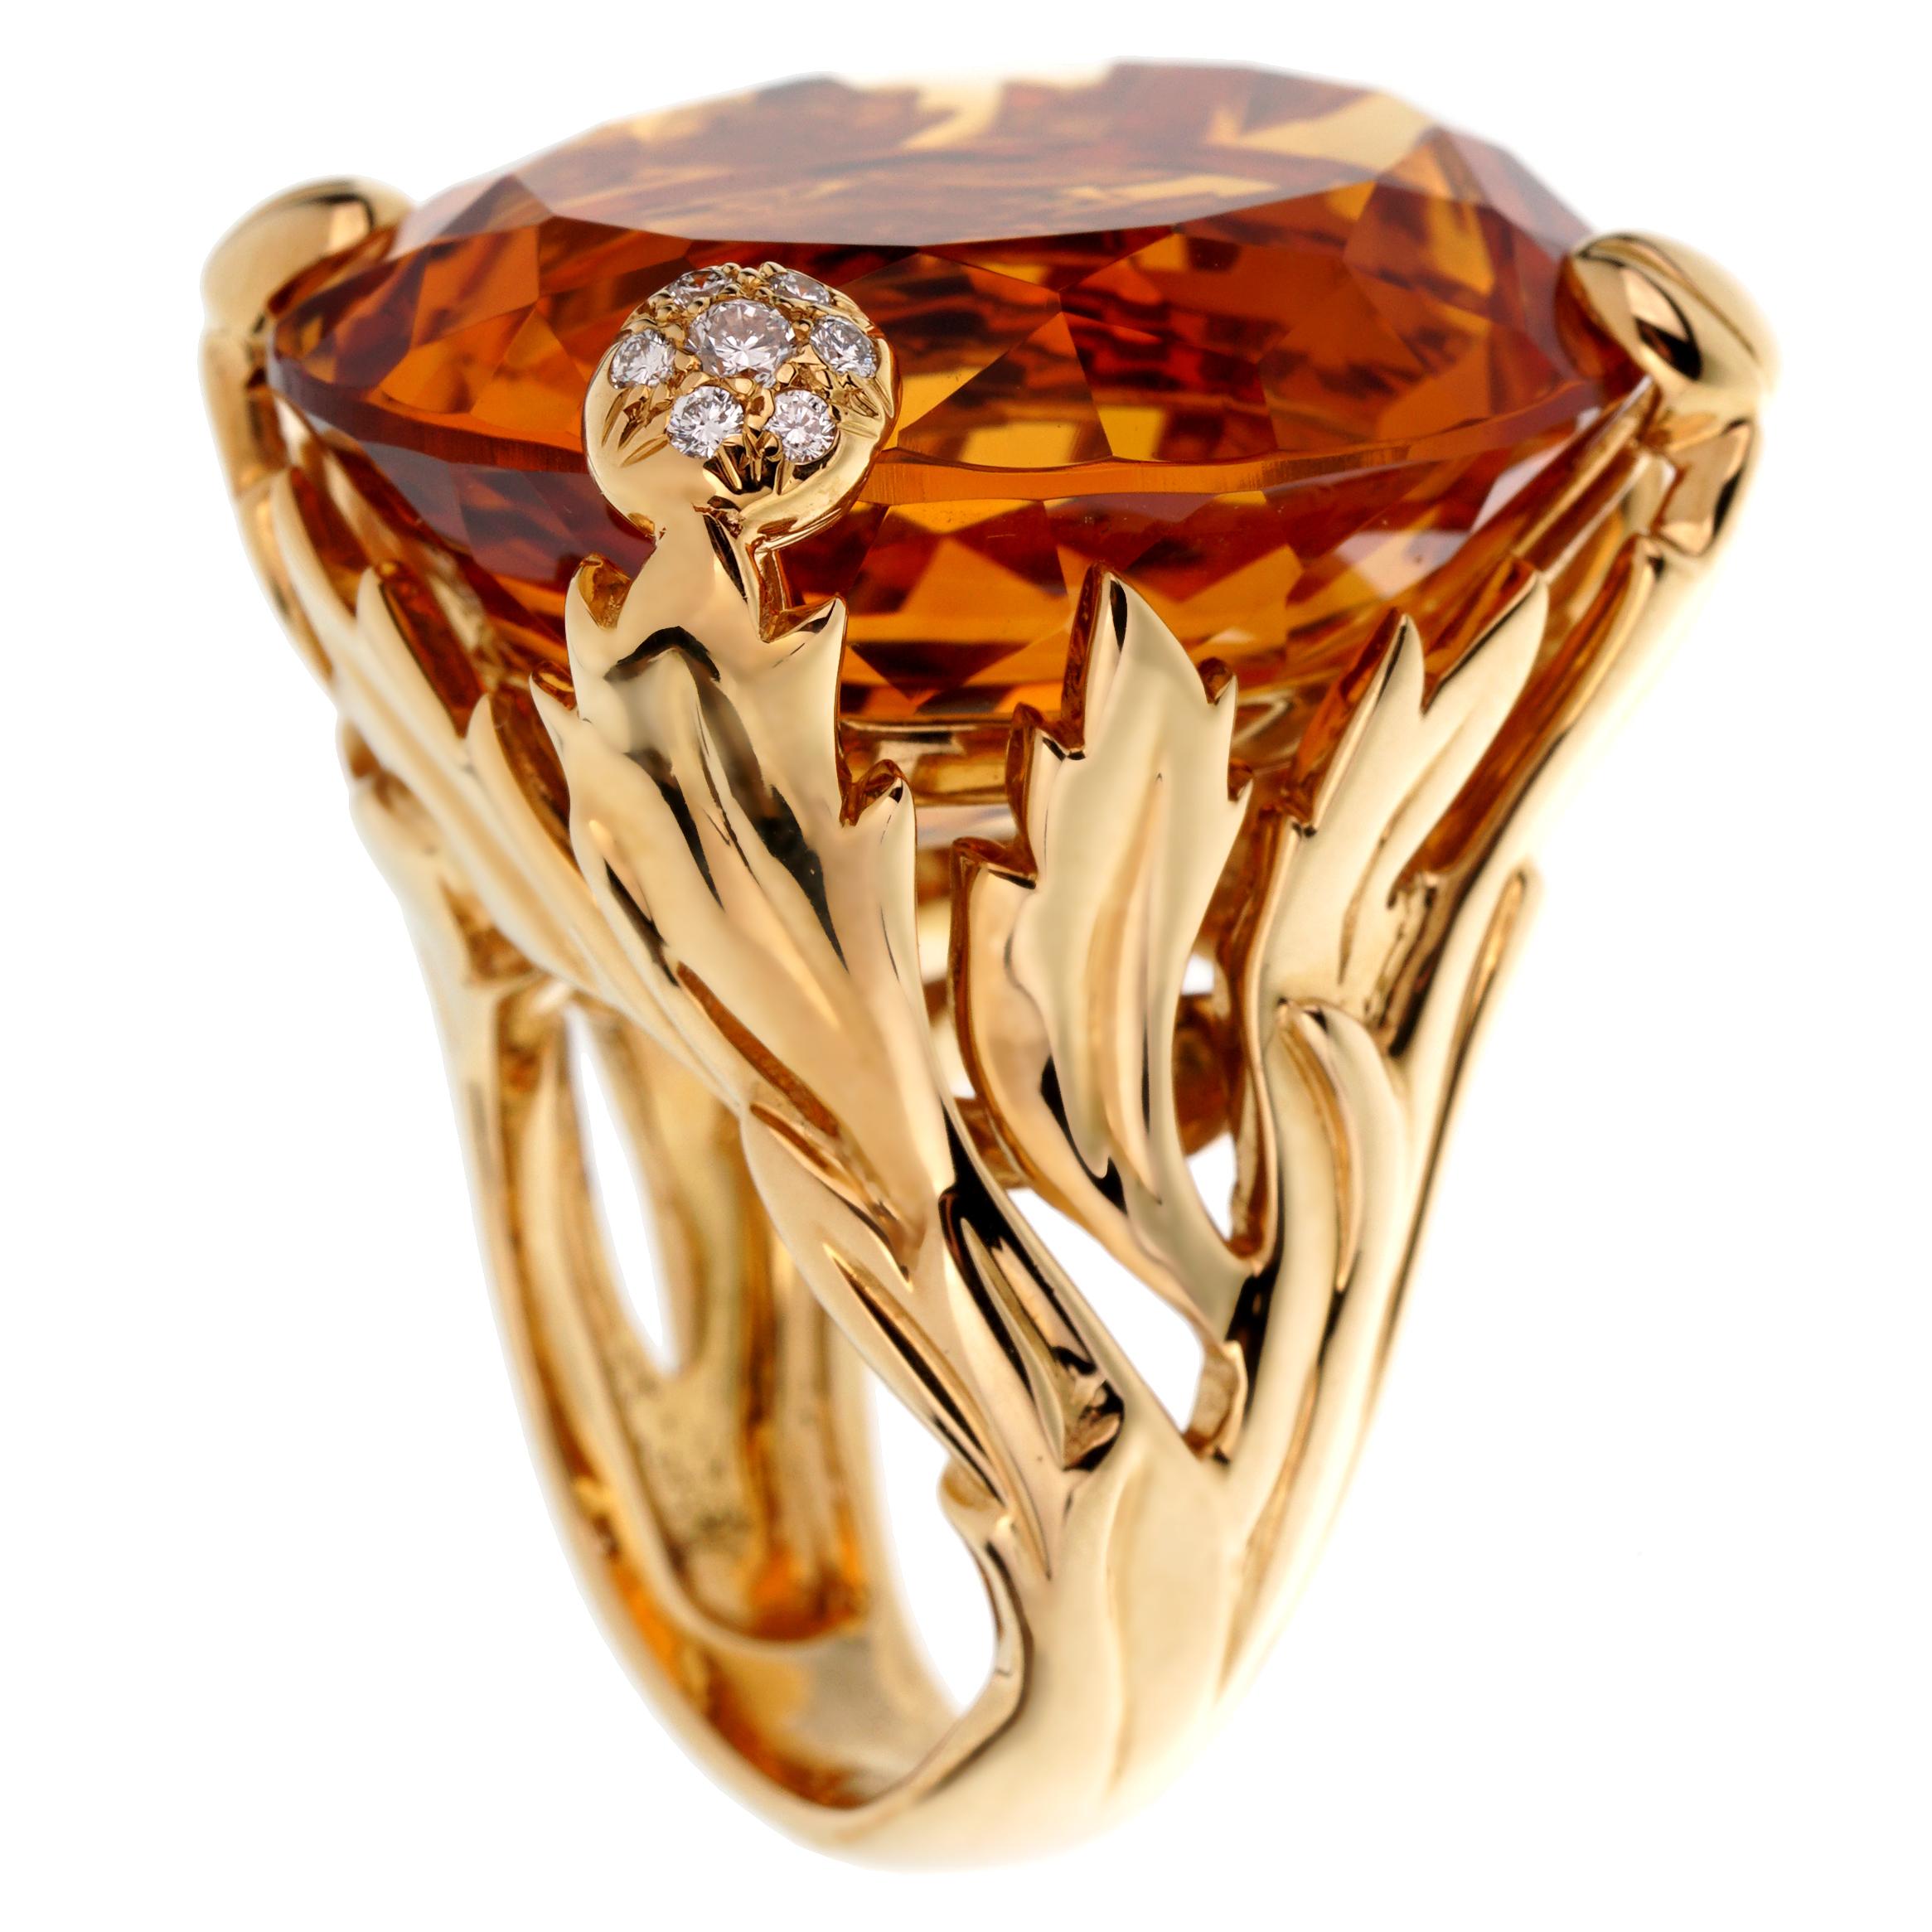 An incredible Christian Dior cocktail ring showcasing a 44.5ct oval citrine adorned by .12ct of the finest round brilliant cut diamonds in 18k yellow gold. The ring measures a size 53 eu